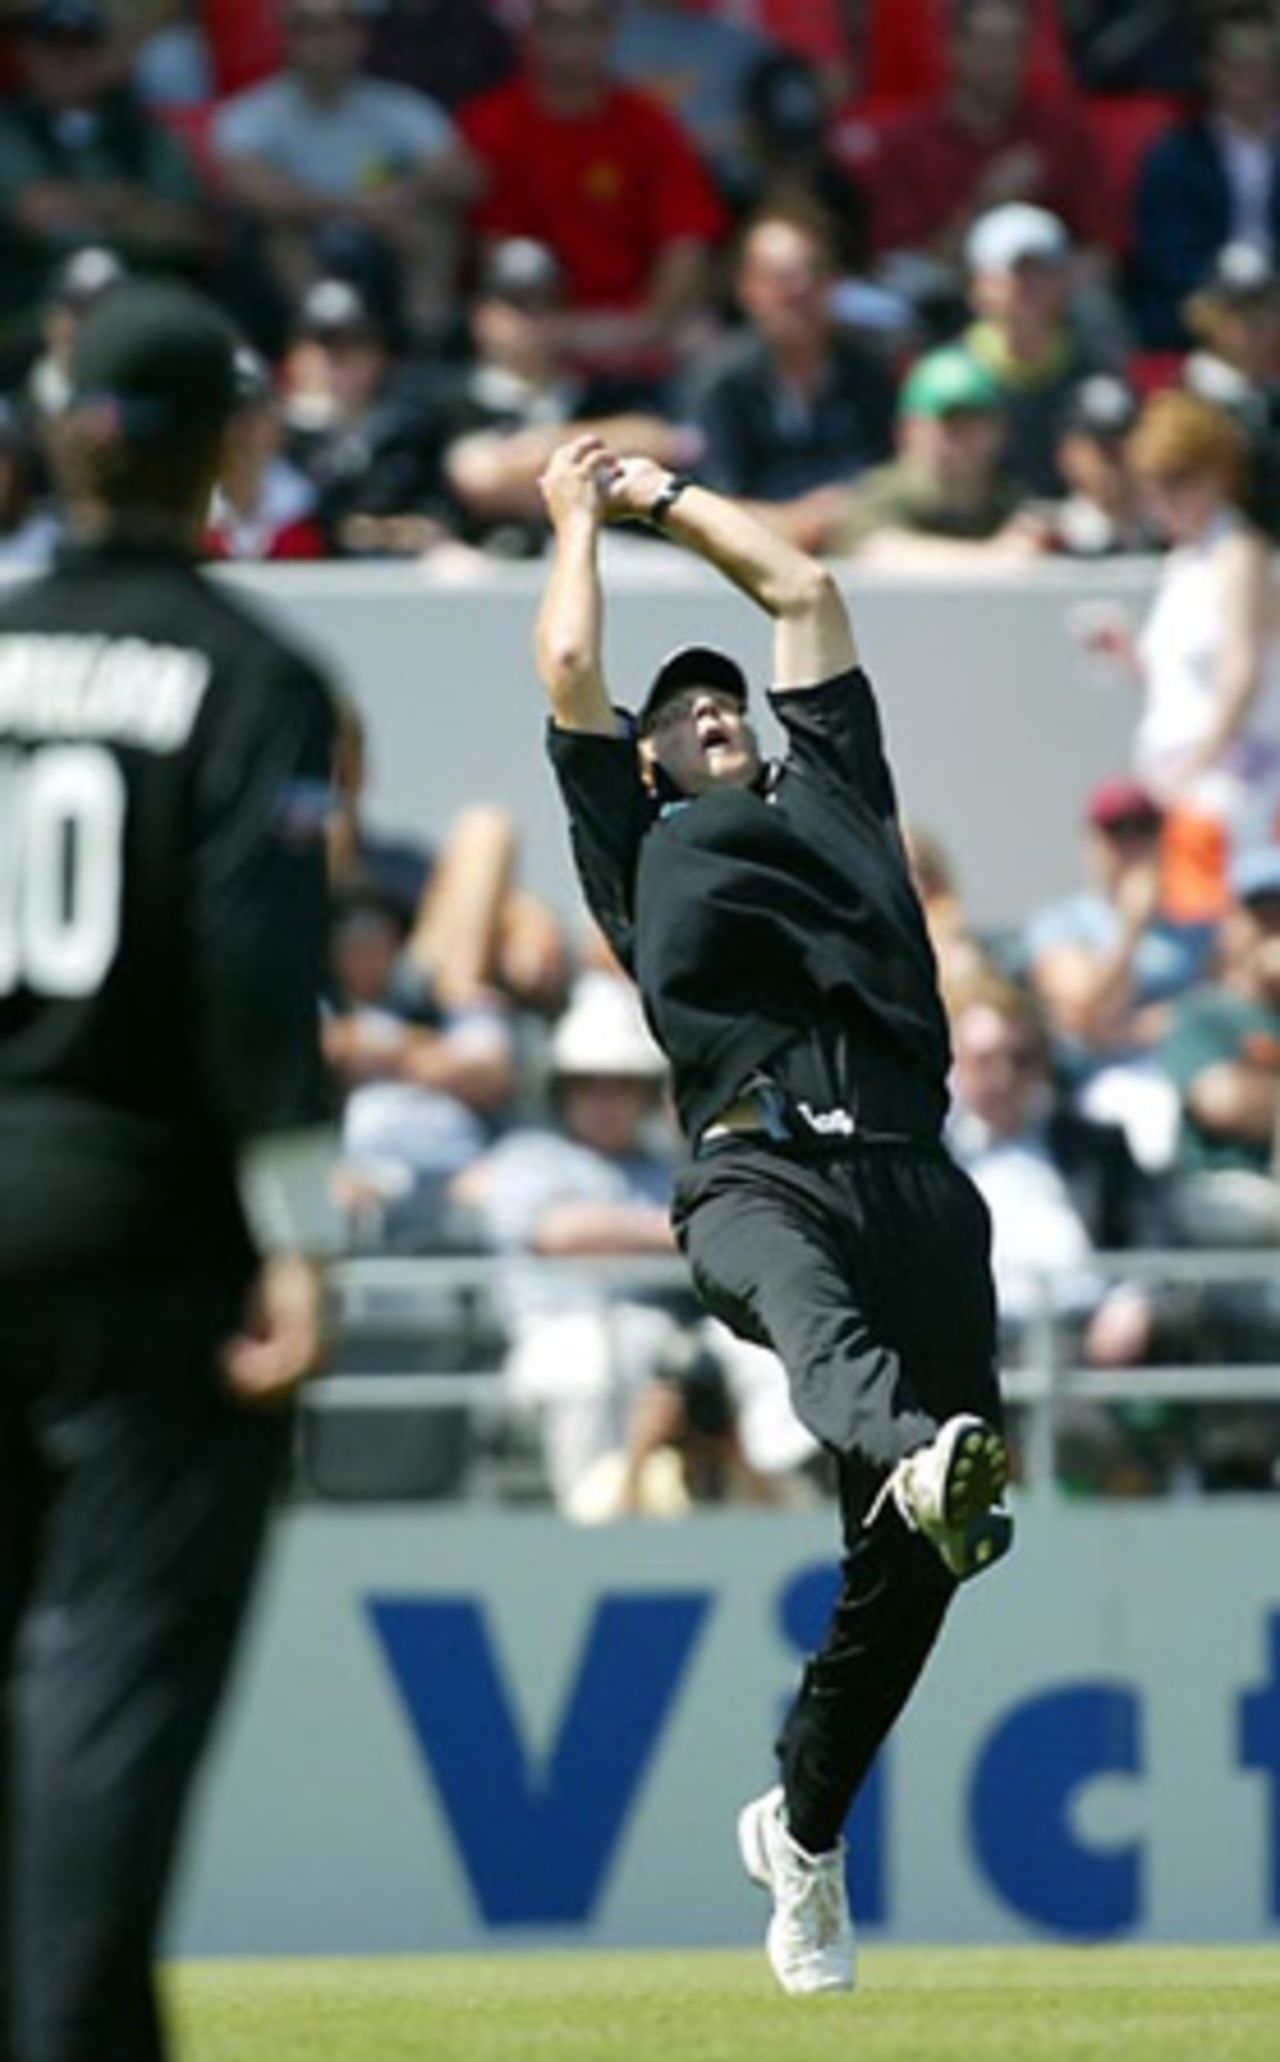 New Zealand fielder Daniel Vettori leaps back to take a catch at mid on off the bowling of Paul Hitchcock to dismiss Indian batsman Rahul Dravid for 20. 3rd ODI: New Zealand v India at Jade Stadium, Christchurch, 1 January 2003.